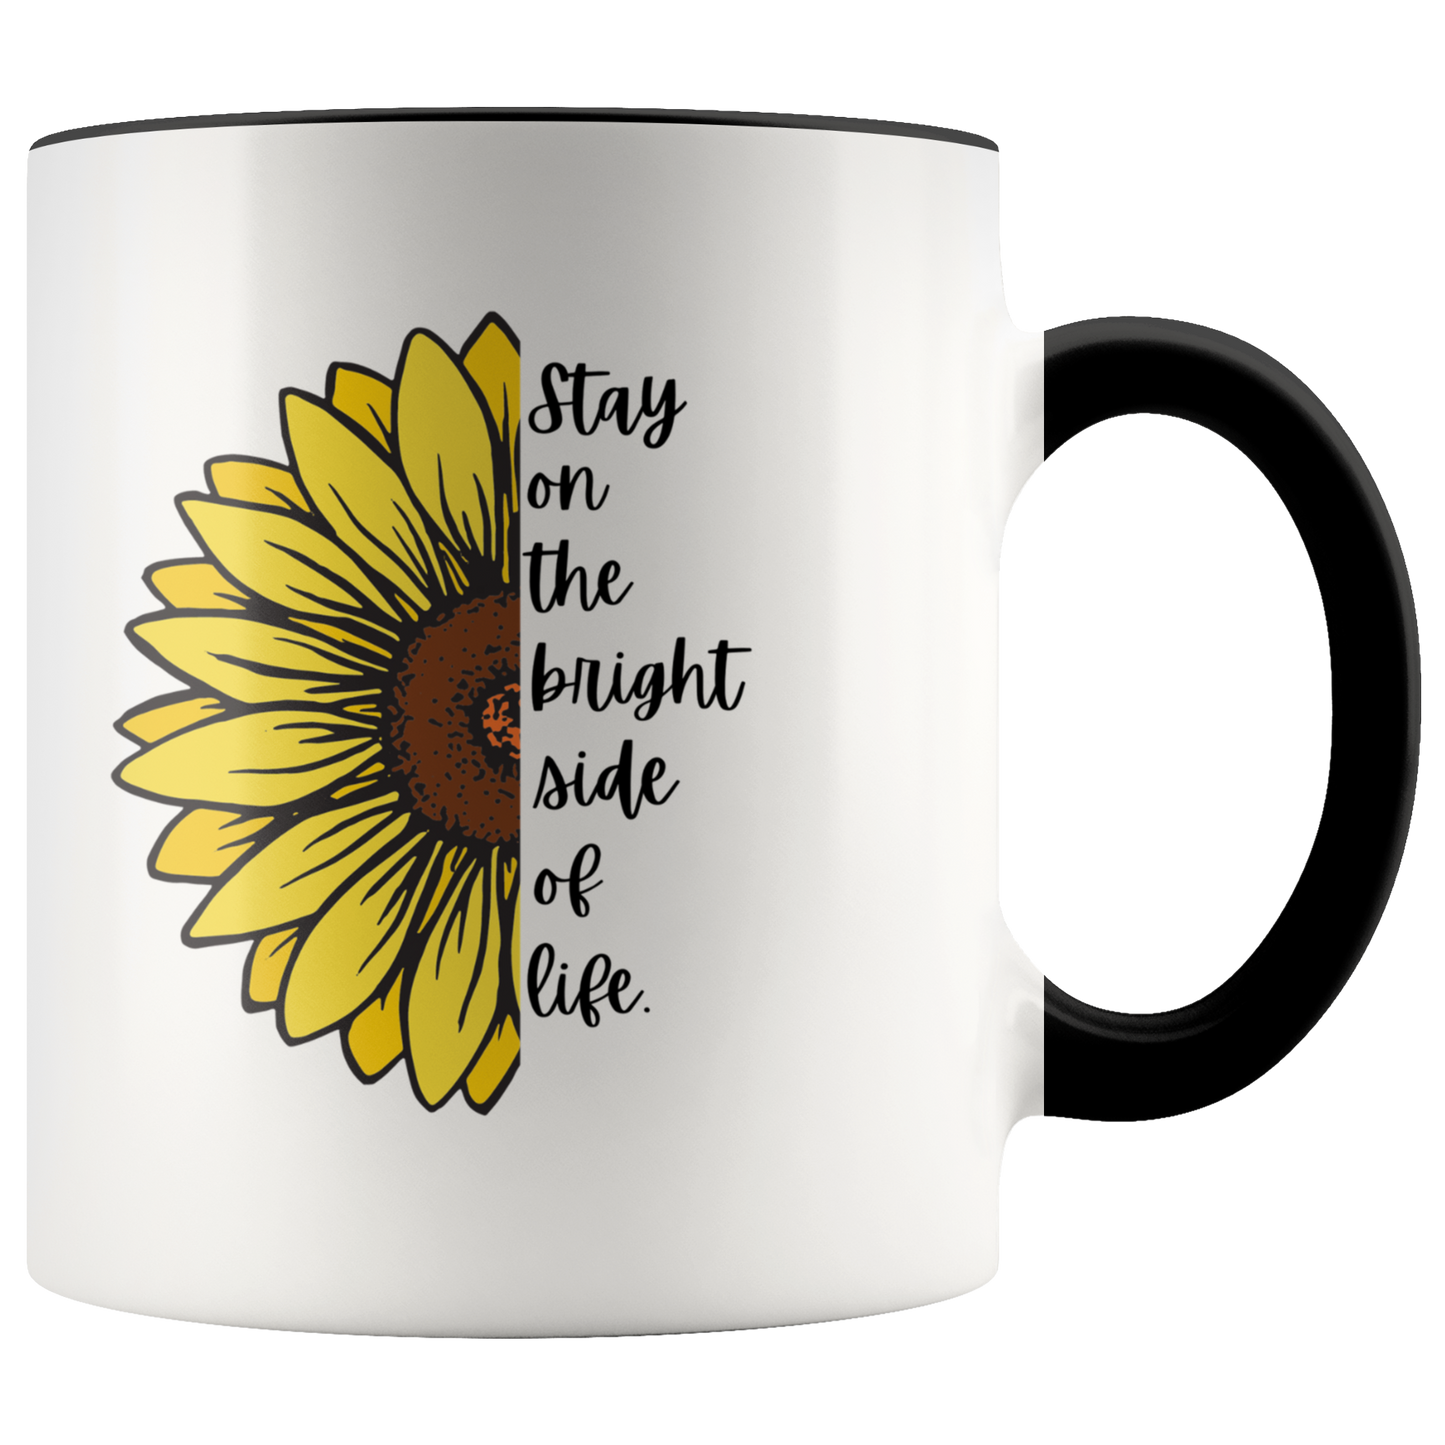 Stay on the Bright Side of Life Mug